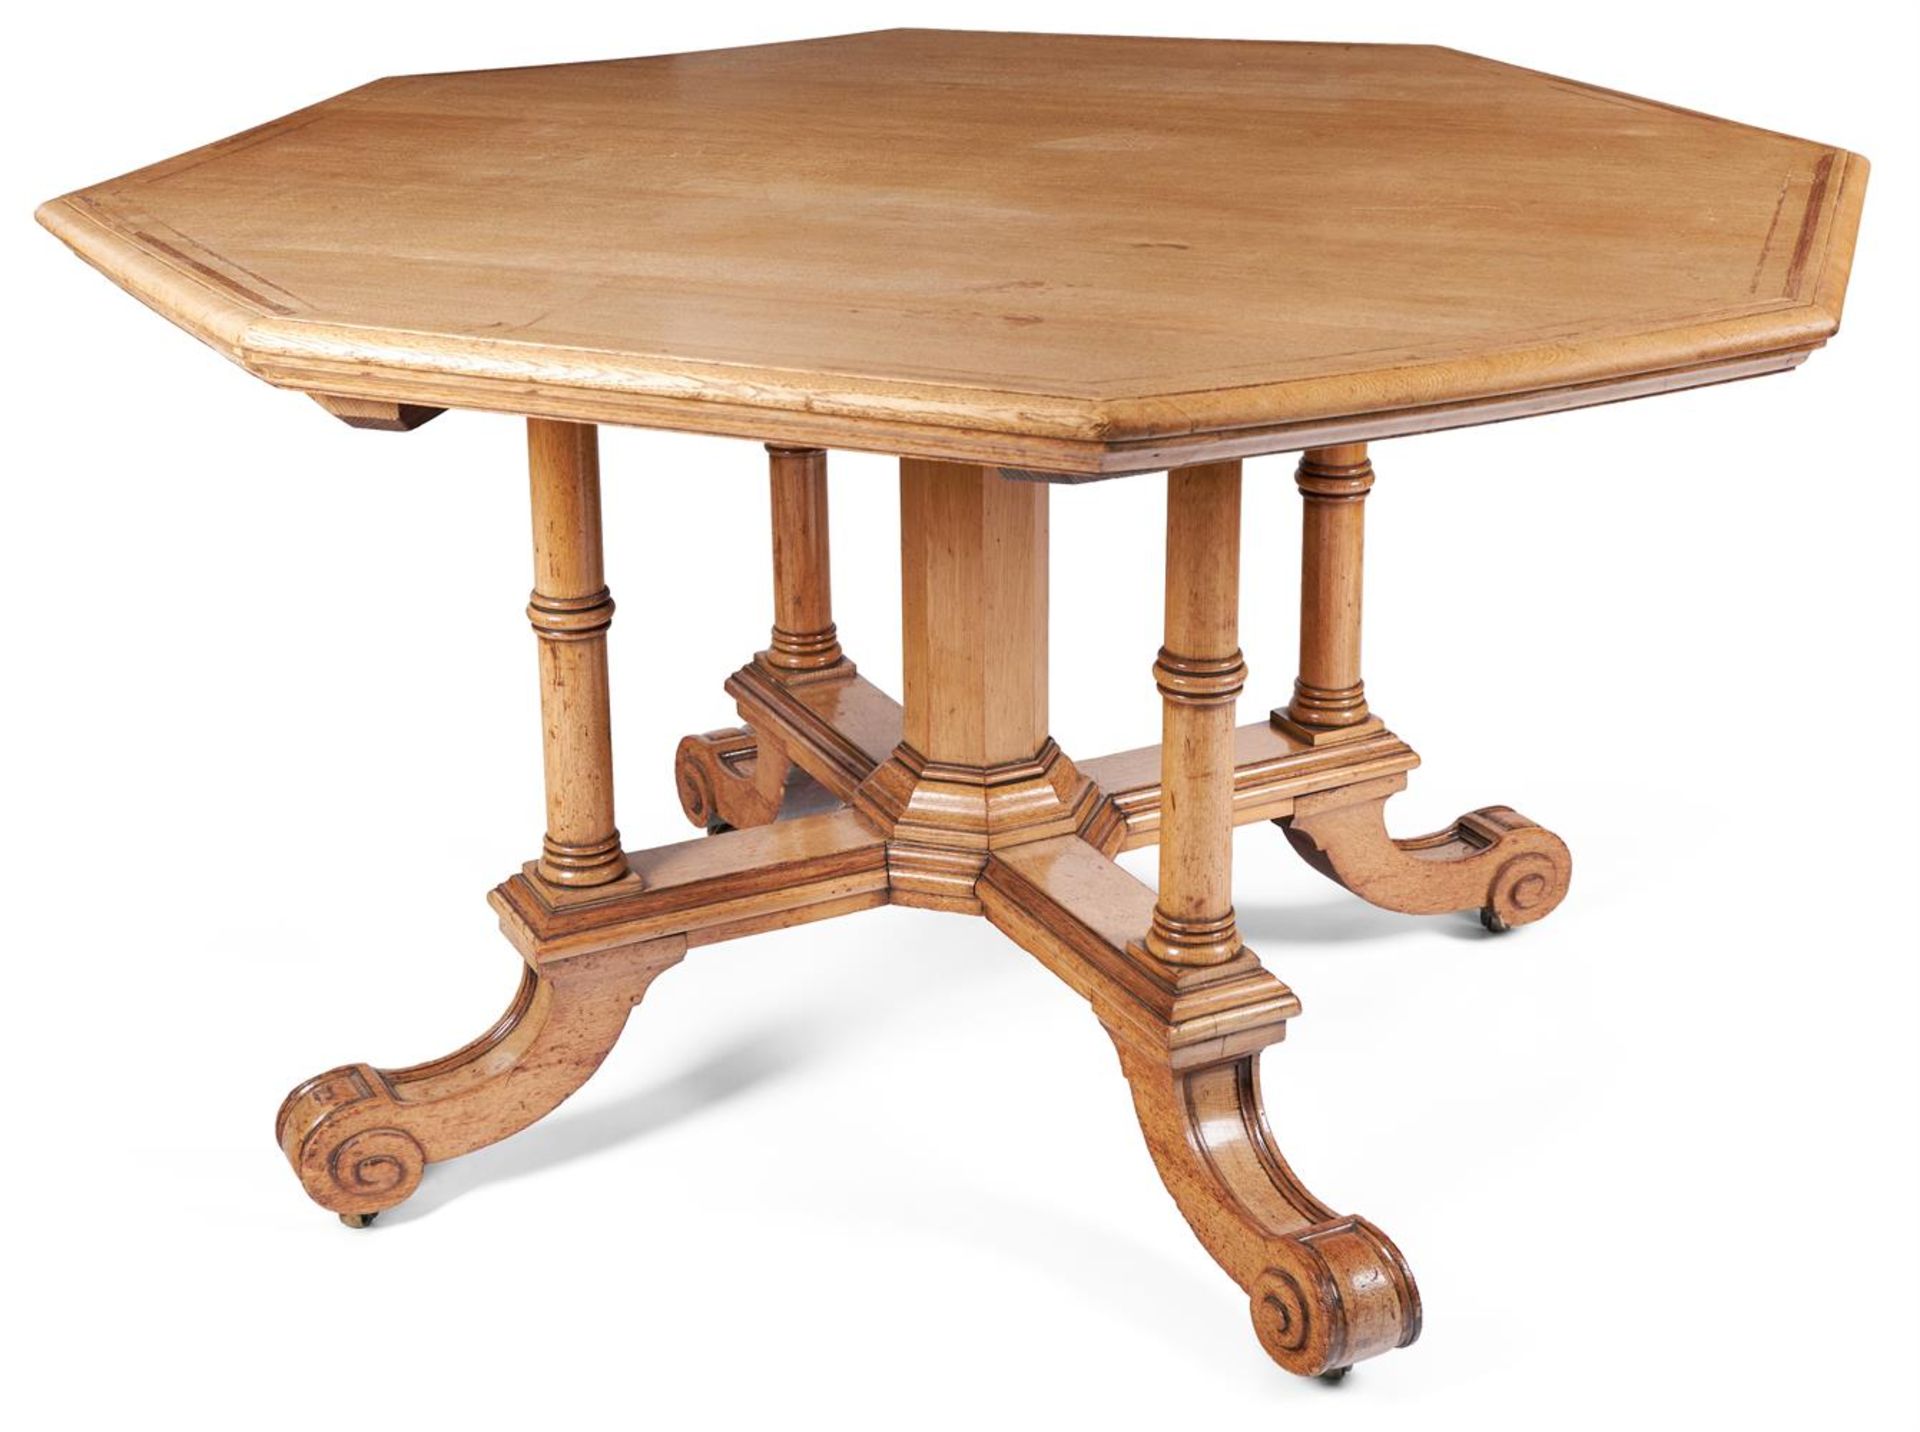 A LATE VICTORIAN OAK OCTAGONAL CENTRE TABLE, MID 19TH CENTURY - Image 2 of 6